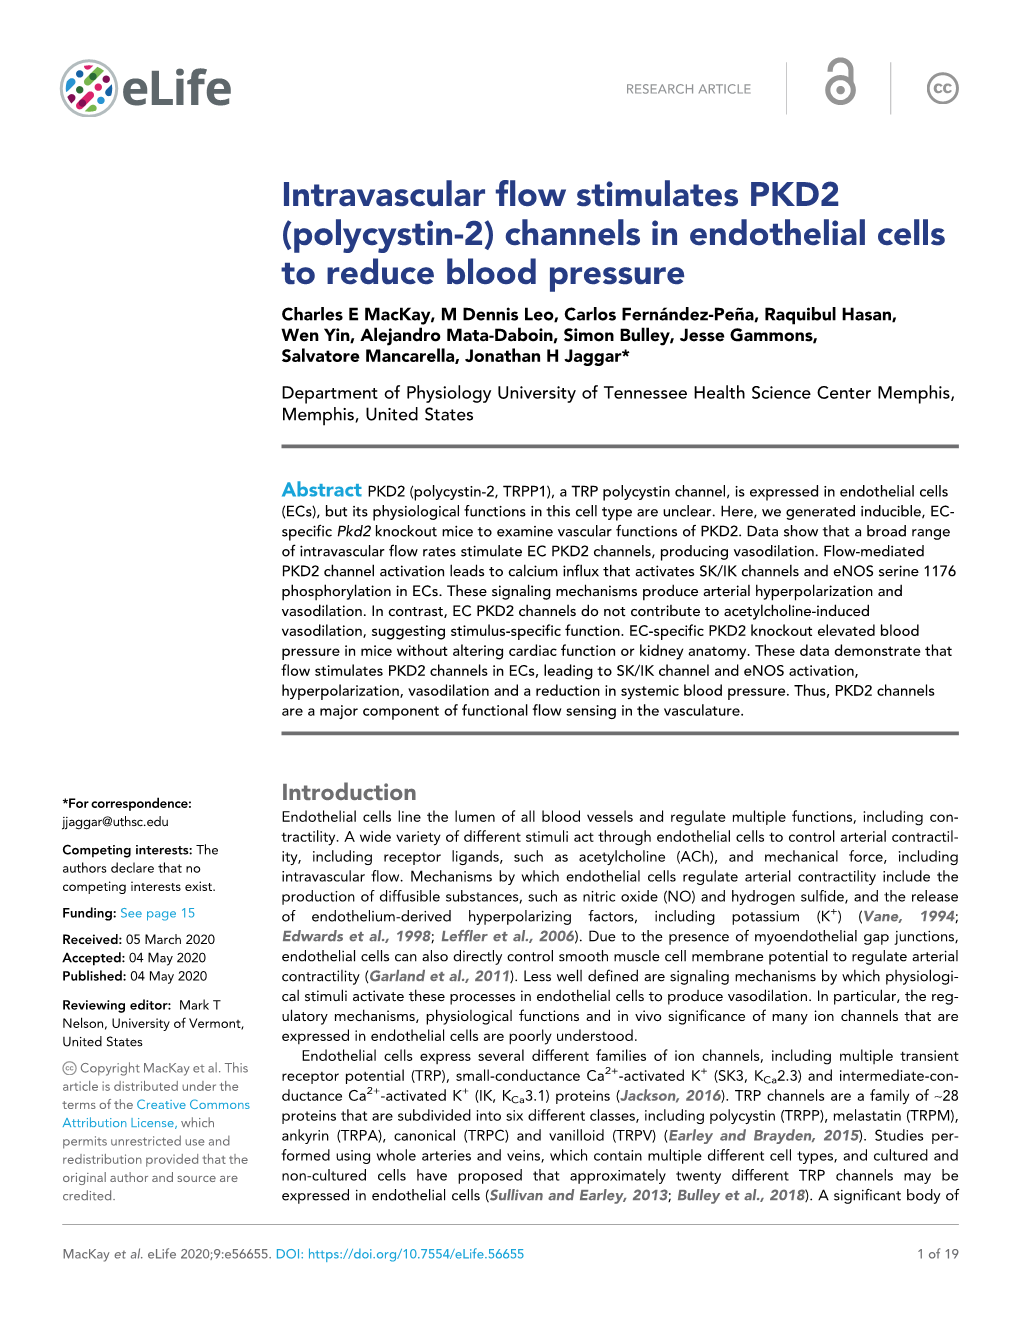 Intravascular Flow Stimulates PKD2 (Polycystin-2) Channels in Endothelial Cells to Reduce Blood Pressure